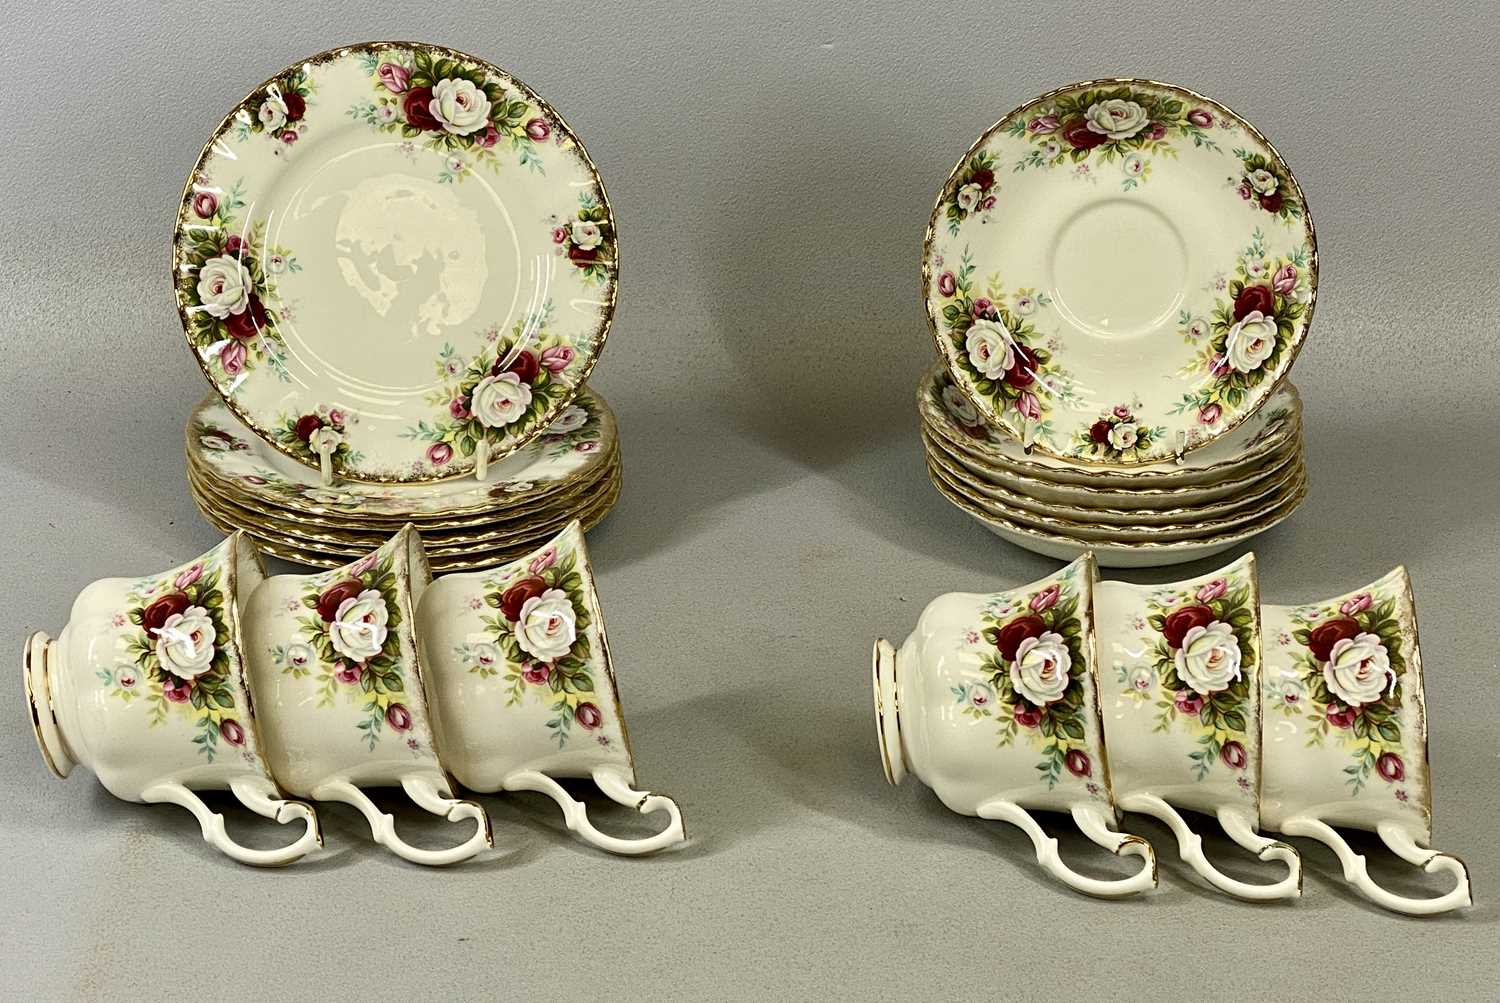 TWO CHINA TEA SERVICES, Royal Albert 'Celebration' pattern, six cups, six saucers, six side plates - Image 3 of 5